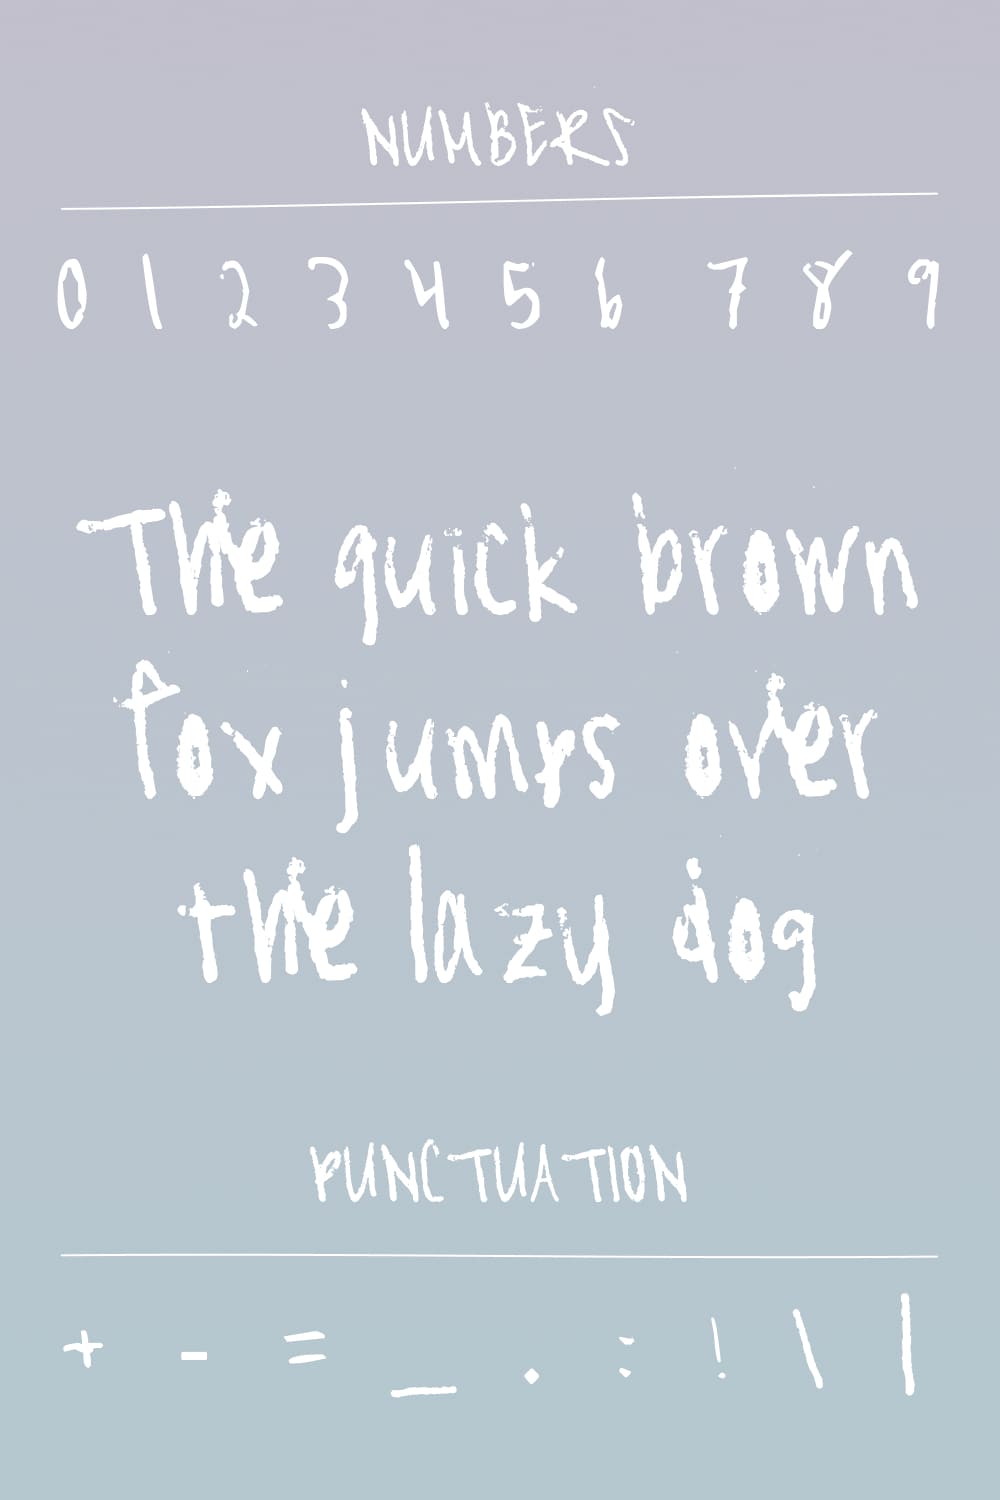 There are numbers and punctuation in the style of this font, making it consistent.